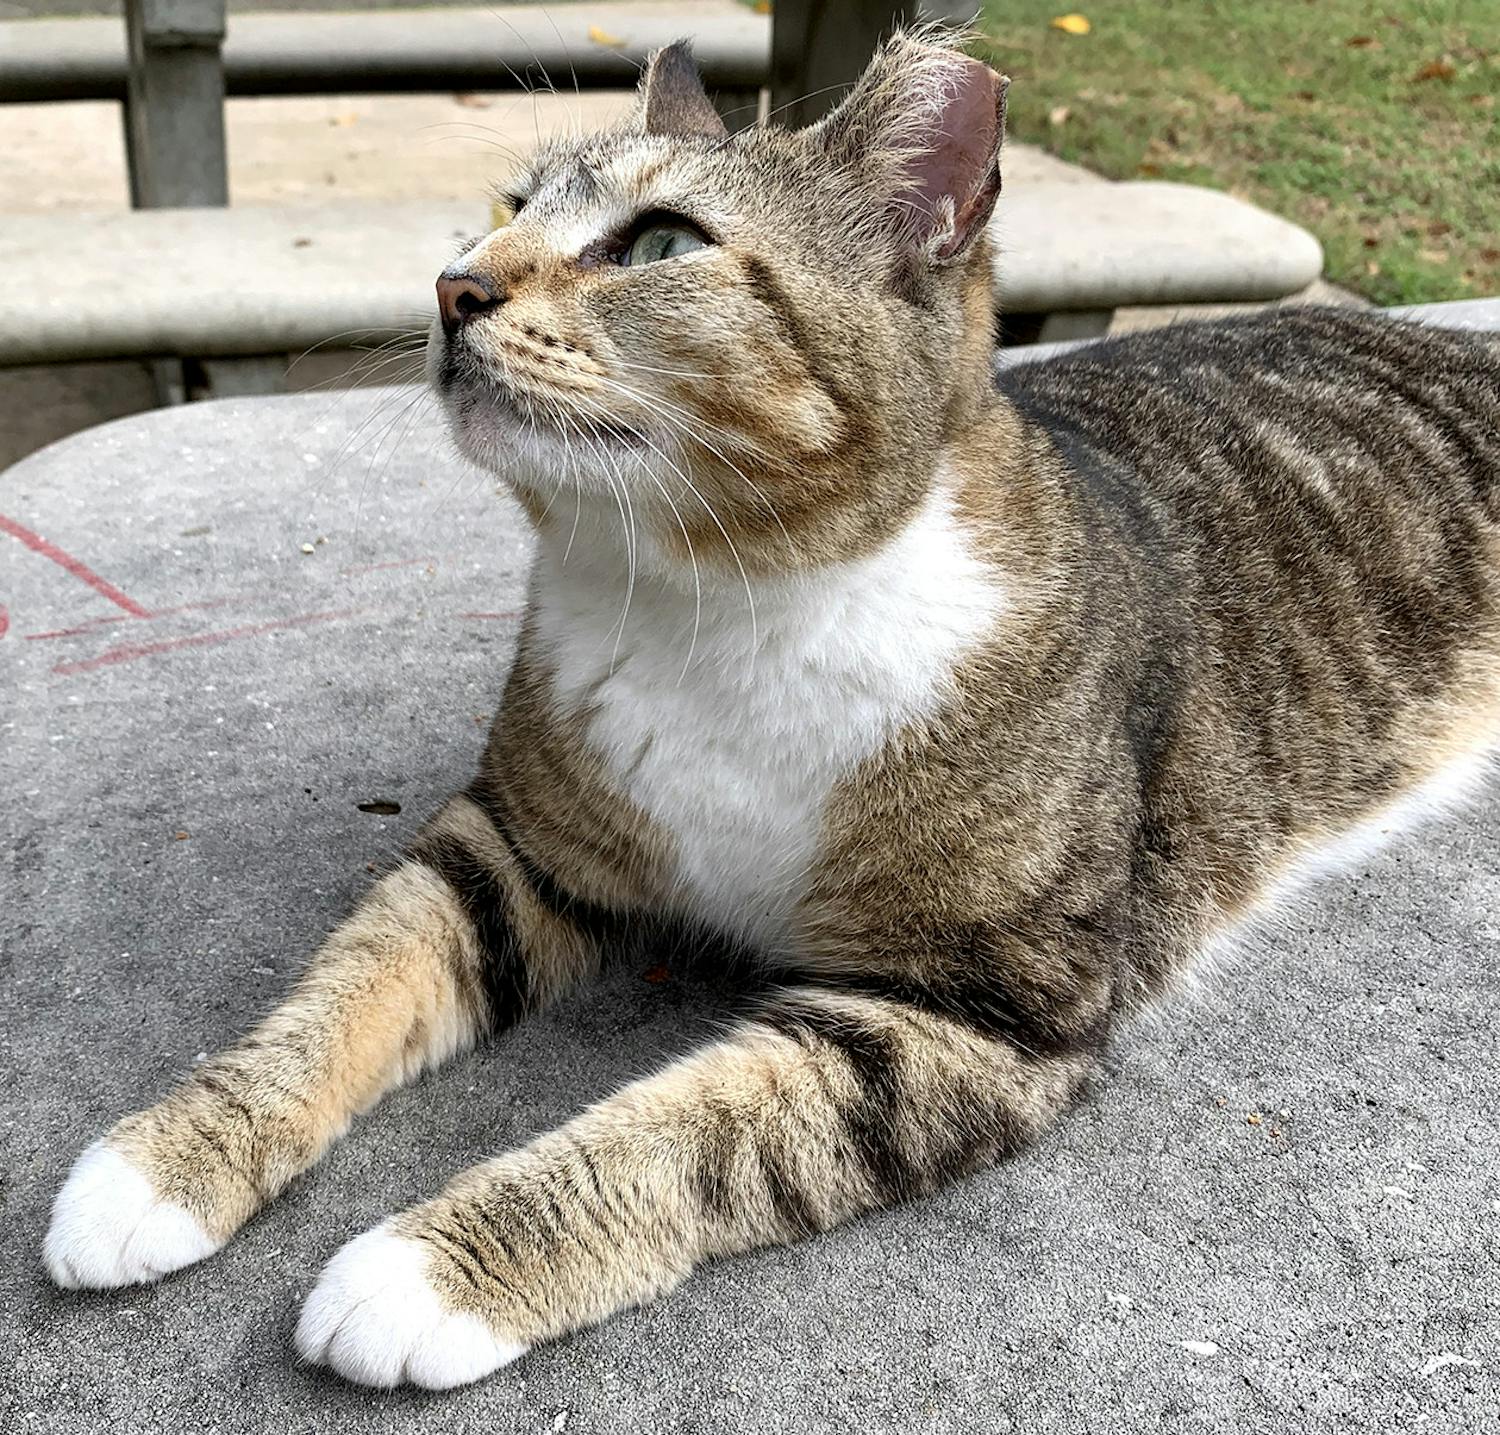 Tenders, one of UF’s campus cats, gazes upward as she sits on a table in the Tolbert Area.